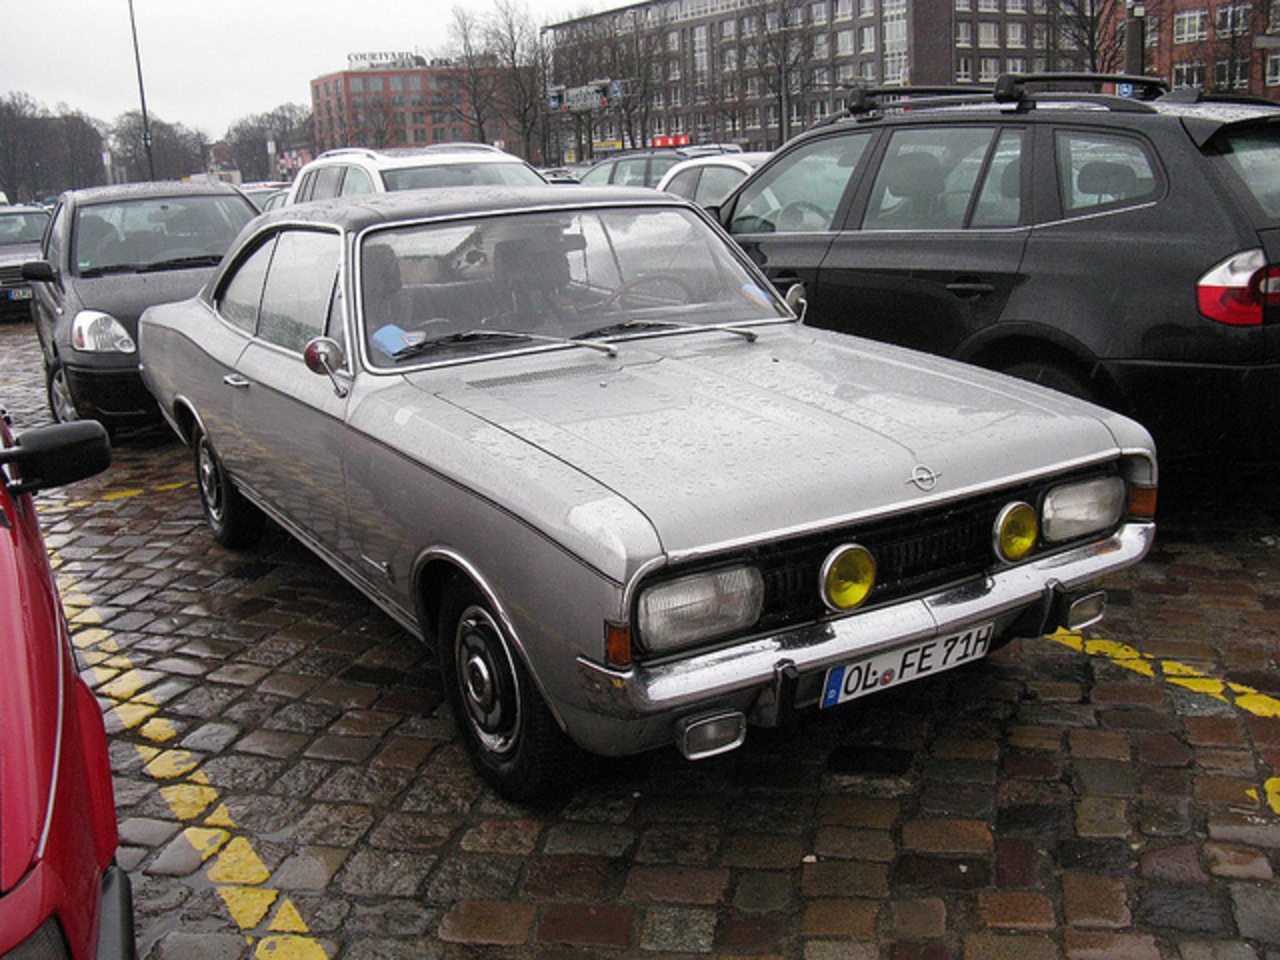 Opel Commodore CoupÃ© | Flickr - Photo Sharing!